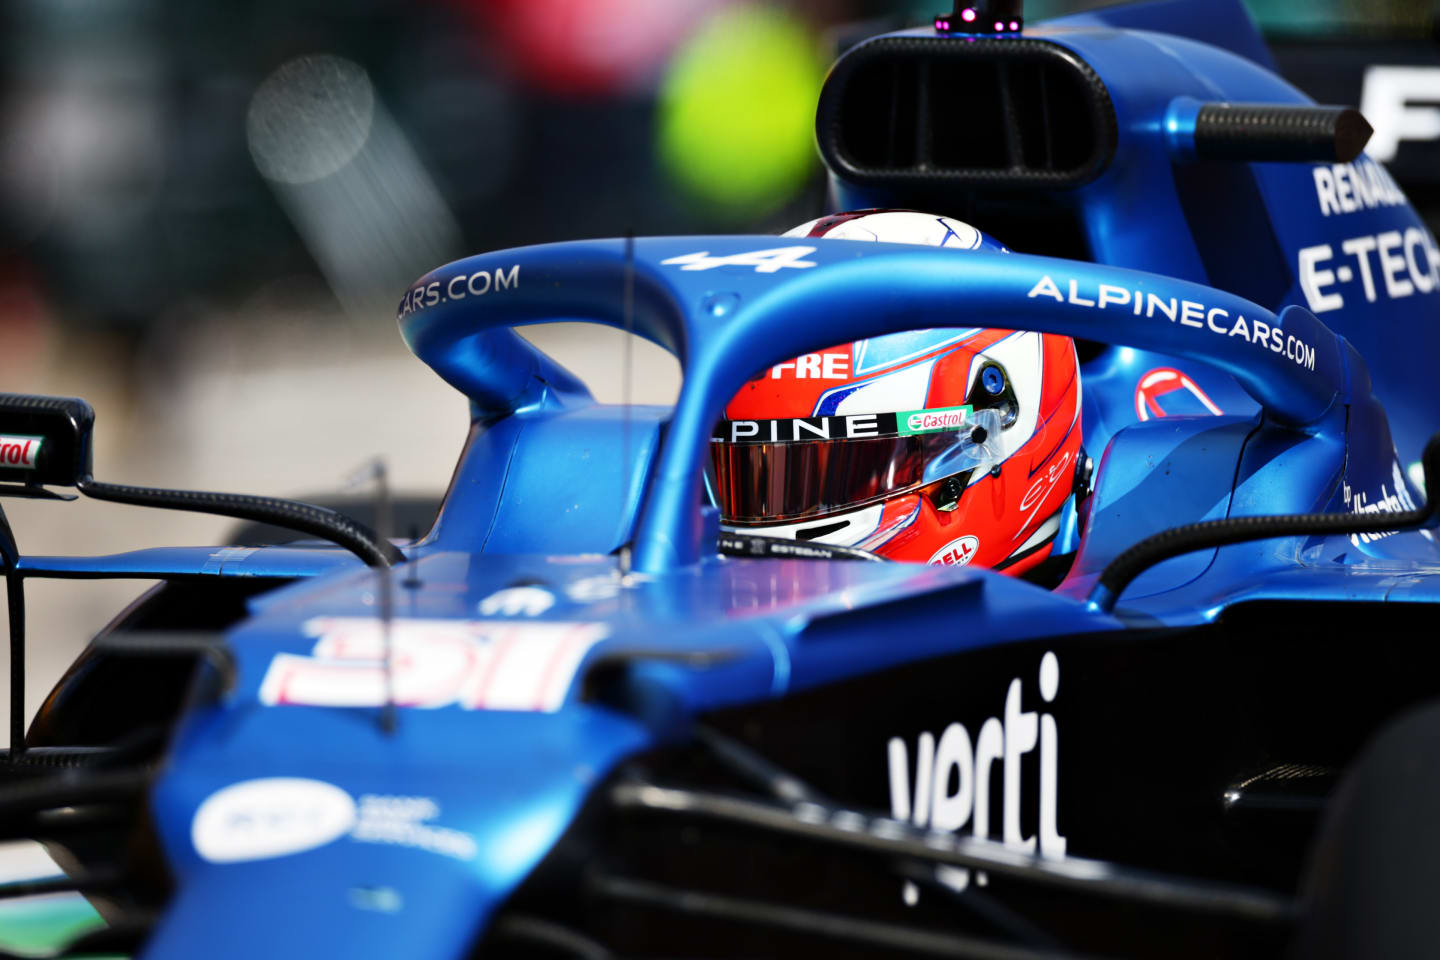 IMOLA, ITALY - APRIL 17: Esteban Ocon of France driving the (31) Alpine A521 Renault in the Pitlane